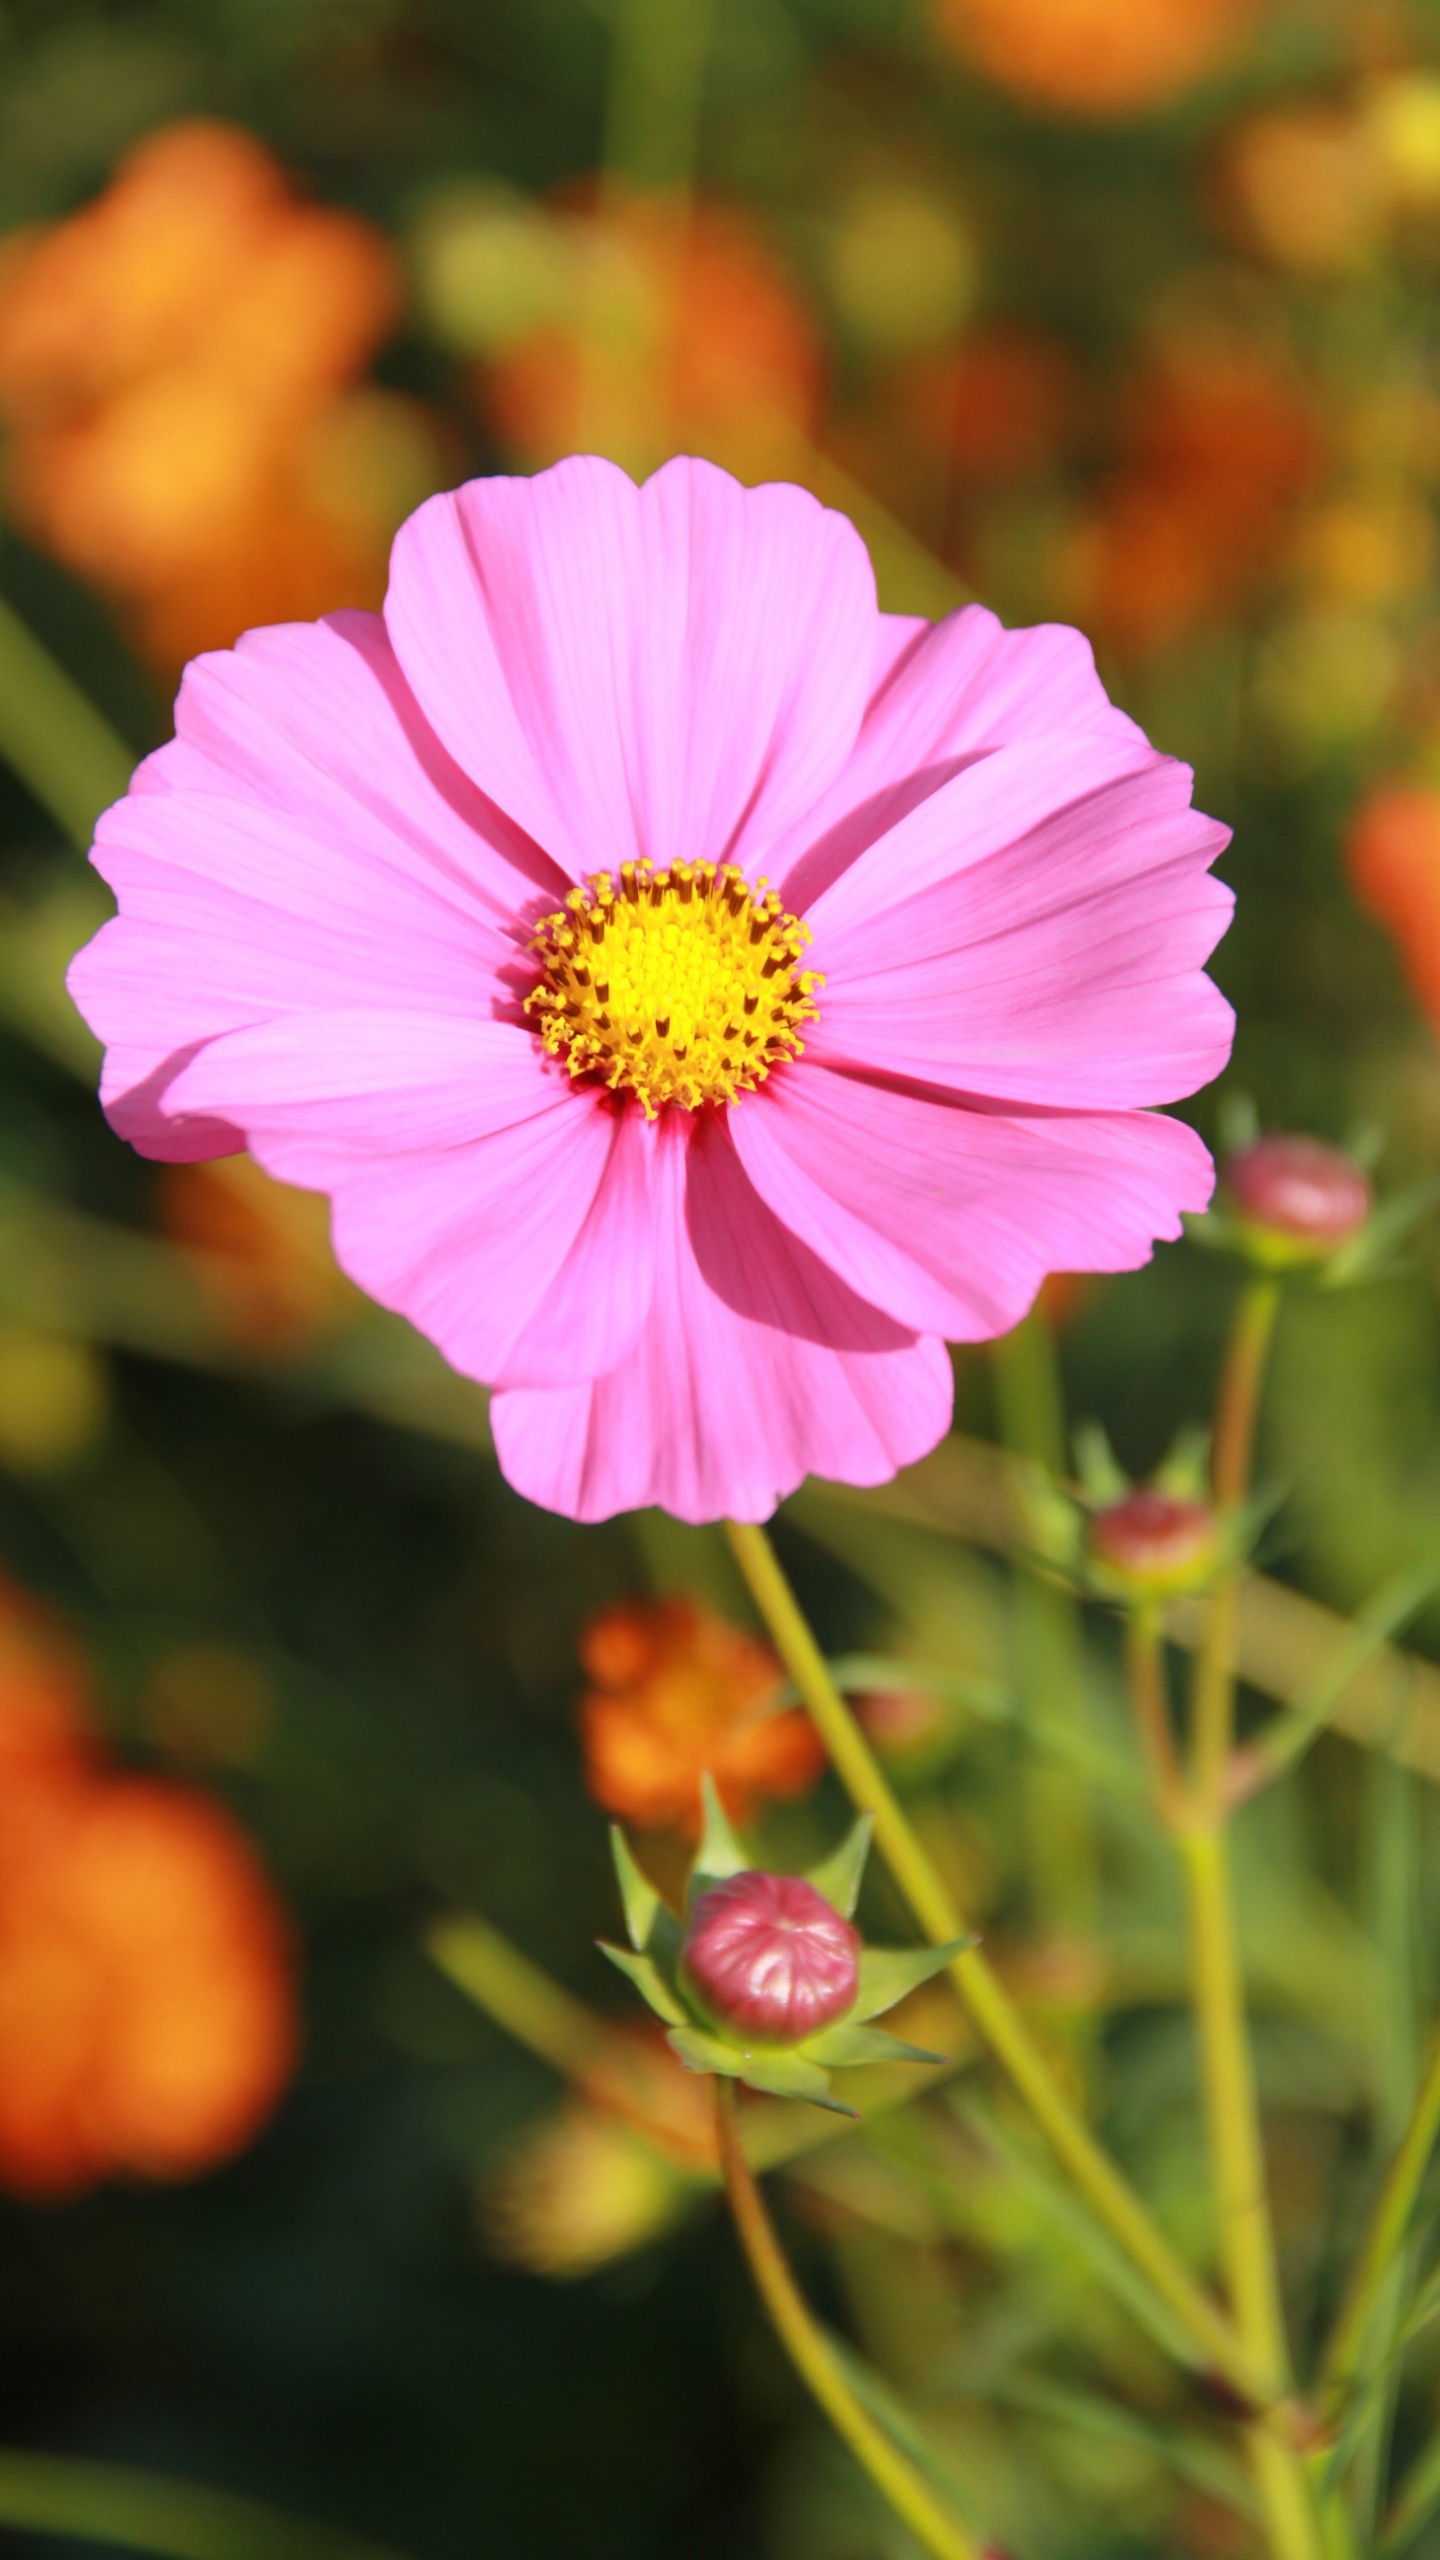 Pink Cosmos Flower in Bloom During Daytime. Wallpaper in 1440x2560 Resolution